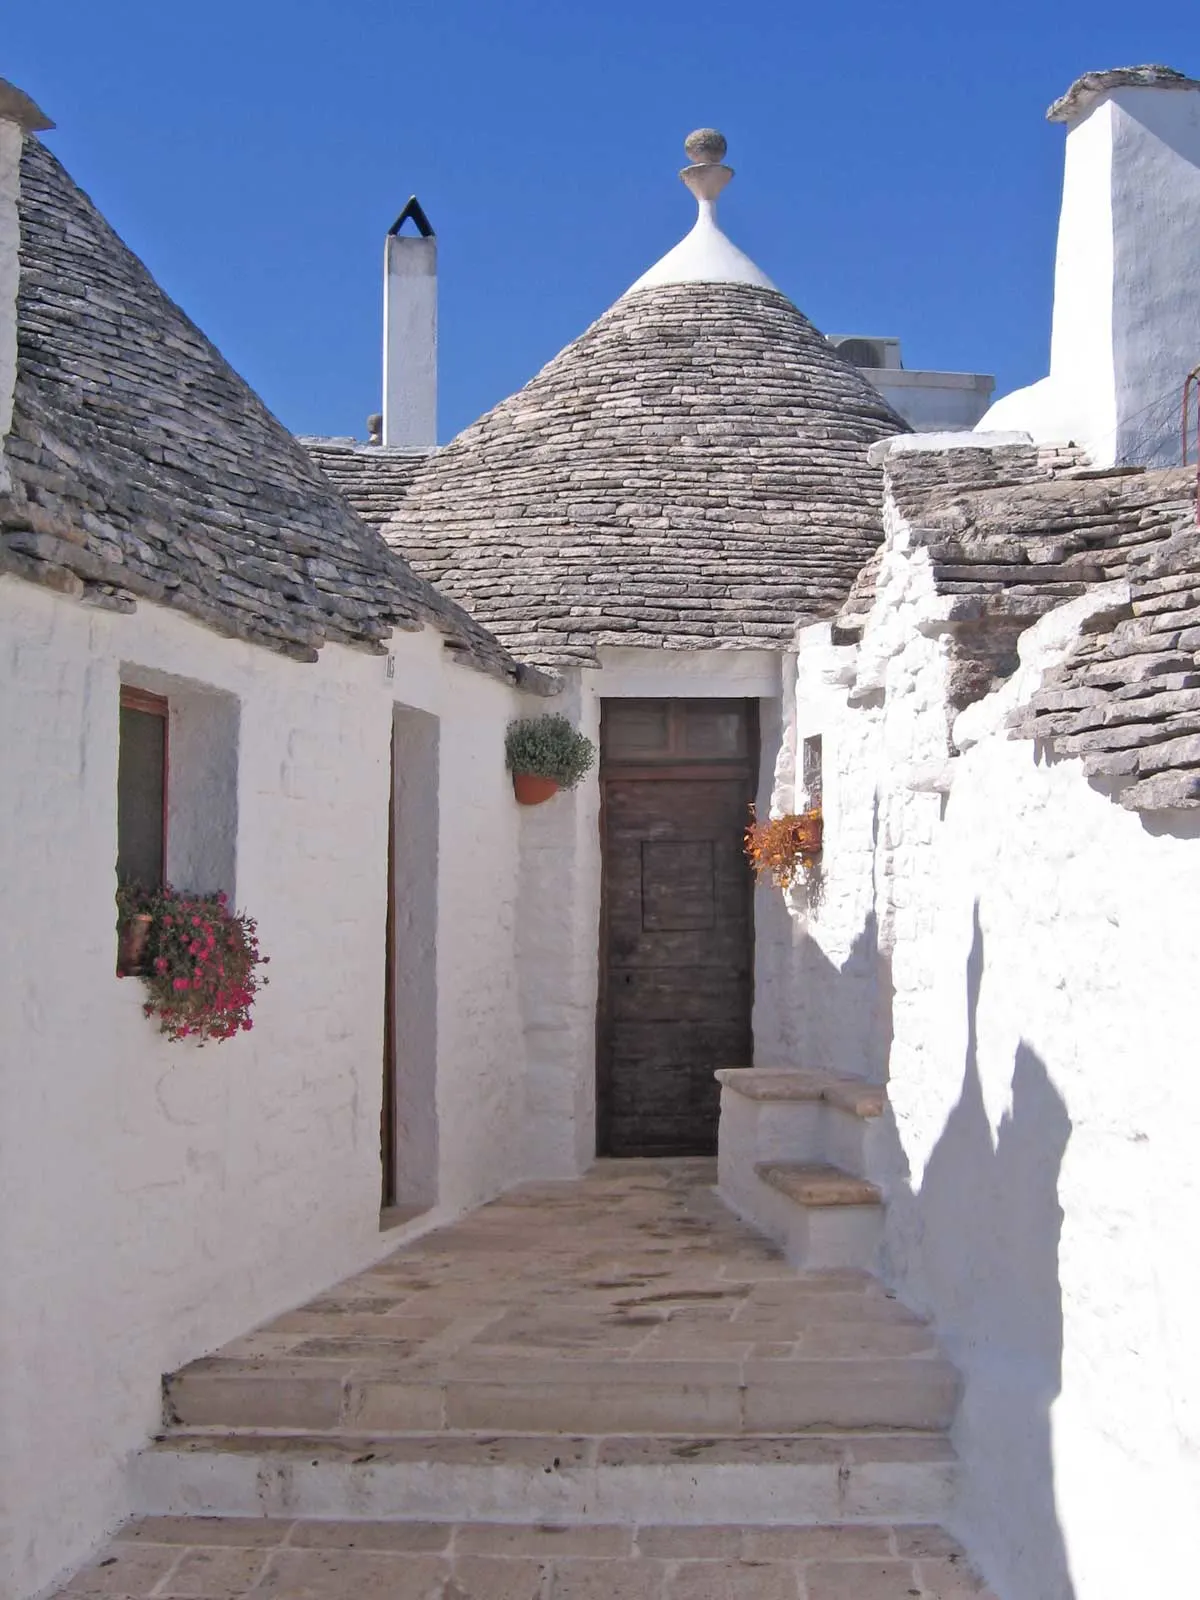 A typical white house in Puglia Italy with the cone shaped slate roof.